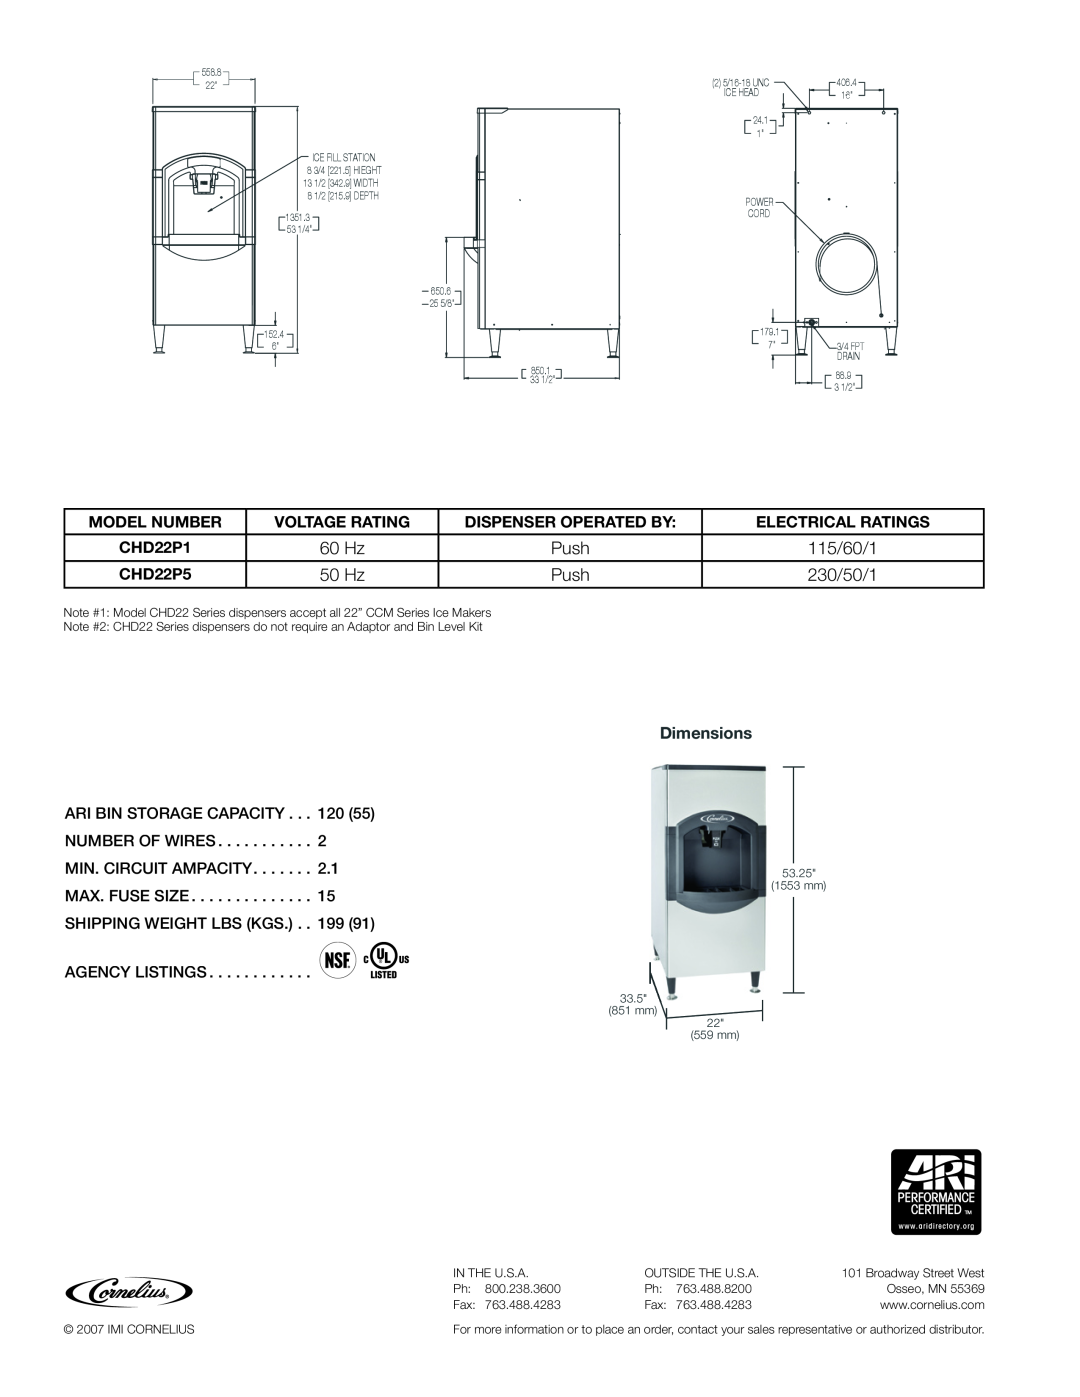 Cornelius Model Number, Voltage Rating, Dispenser Operated By, Electrical Ratings, CHD22P1, 60 Hz, CHD22P5, 50 Hz, Push 